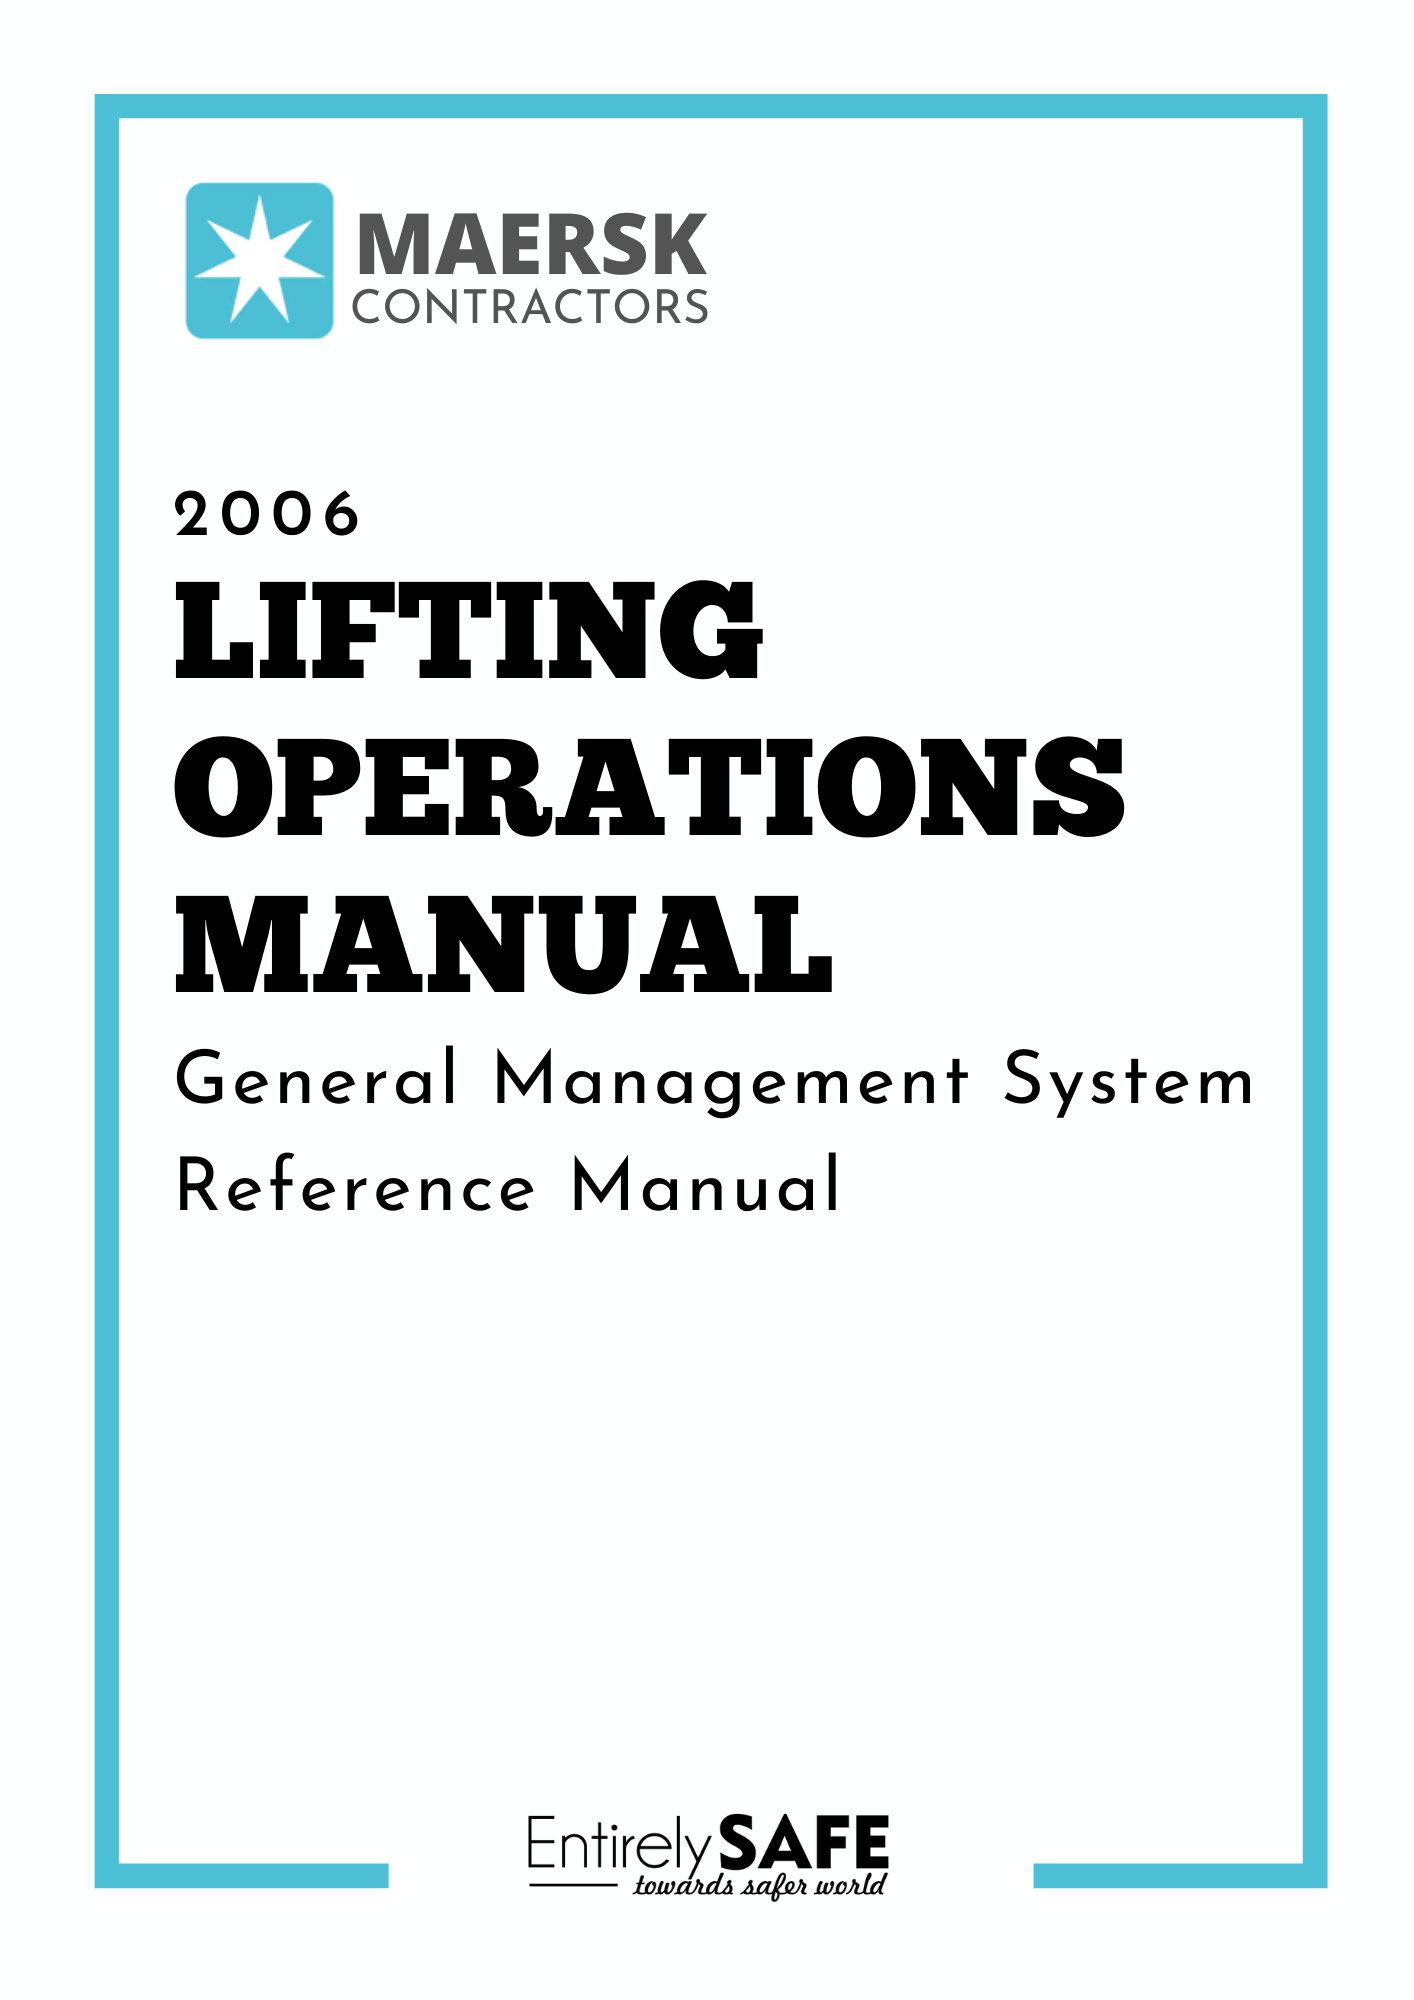 138-Download-FREE-Lifting-Operations-Manual-Maersk-Contractors